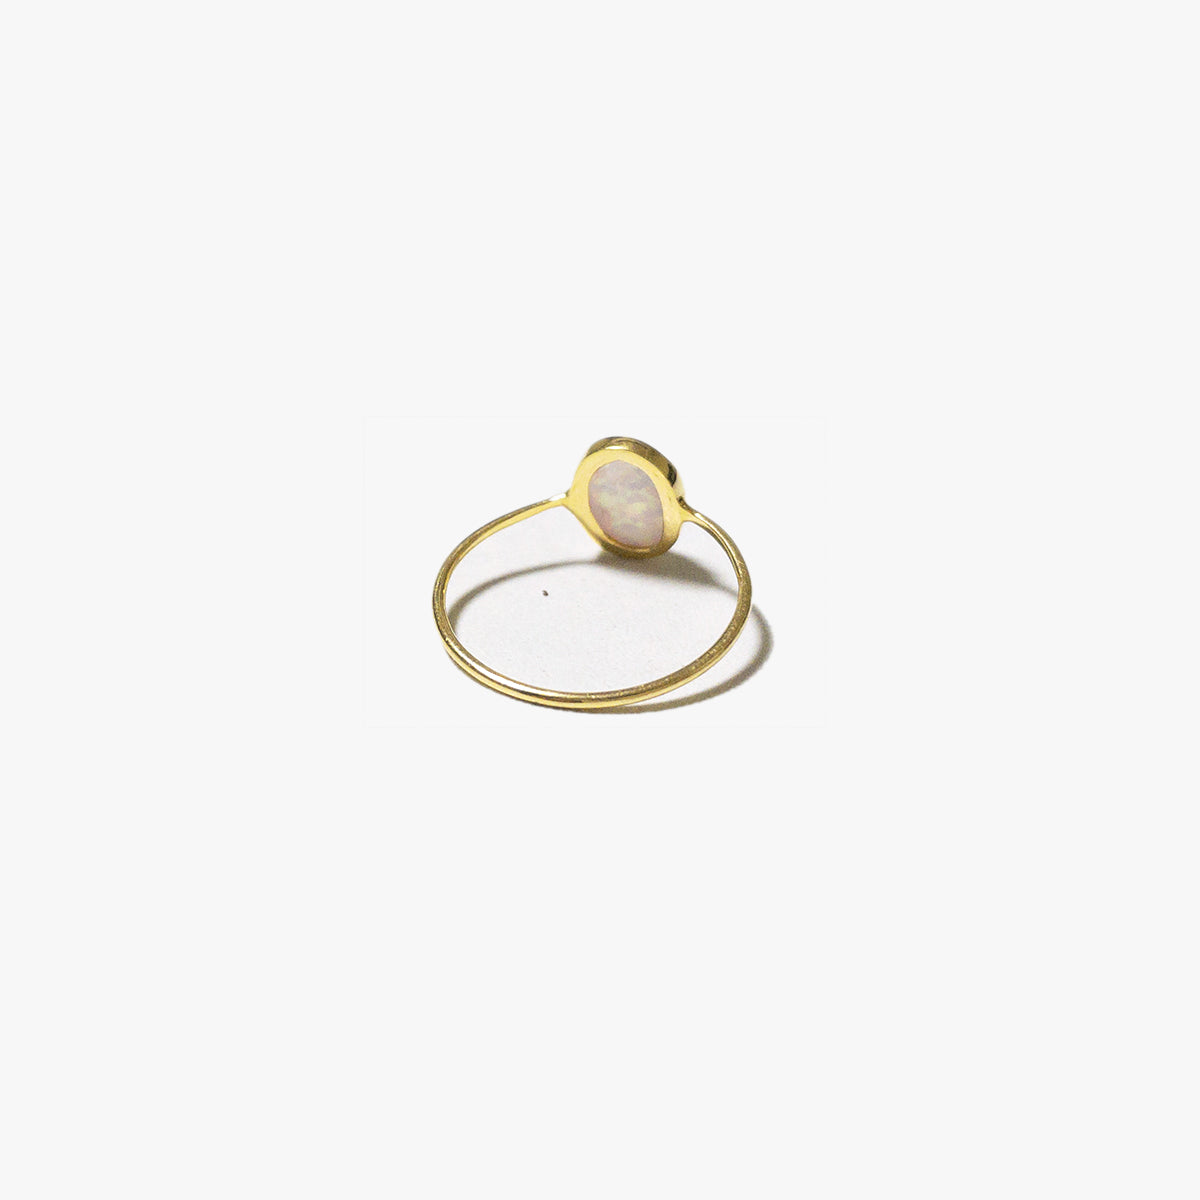 The Oval Birthstone Ring in Solid Gold